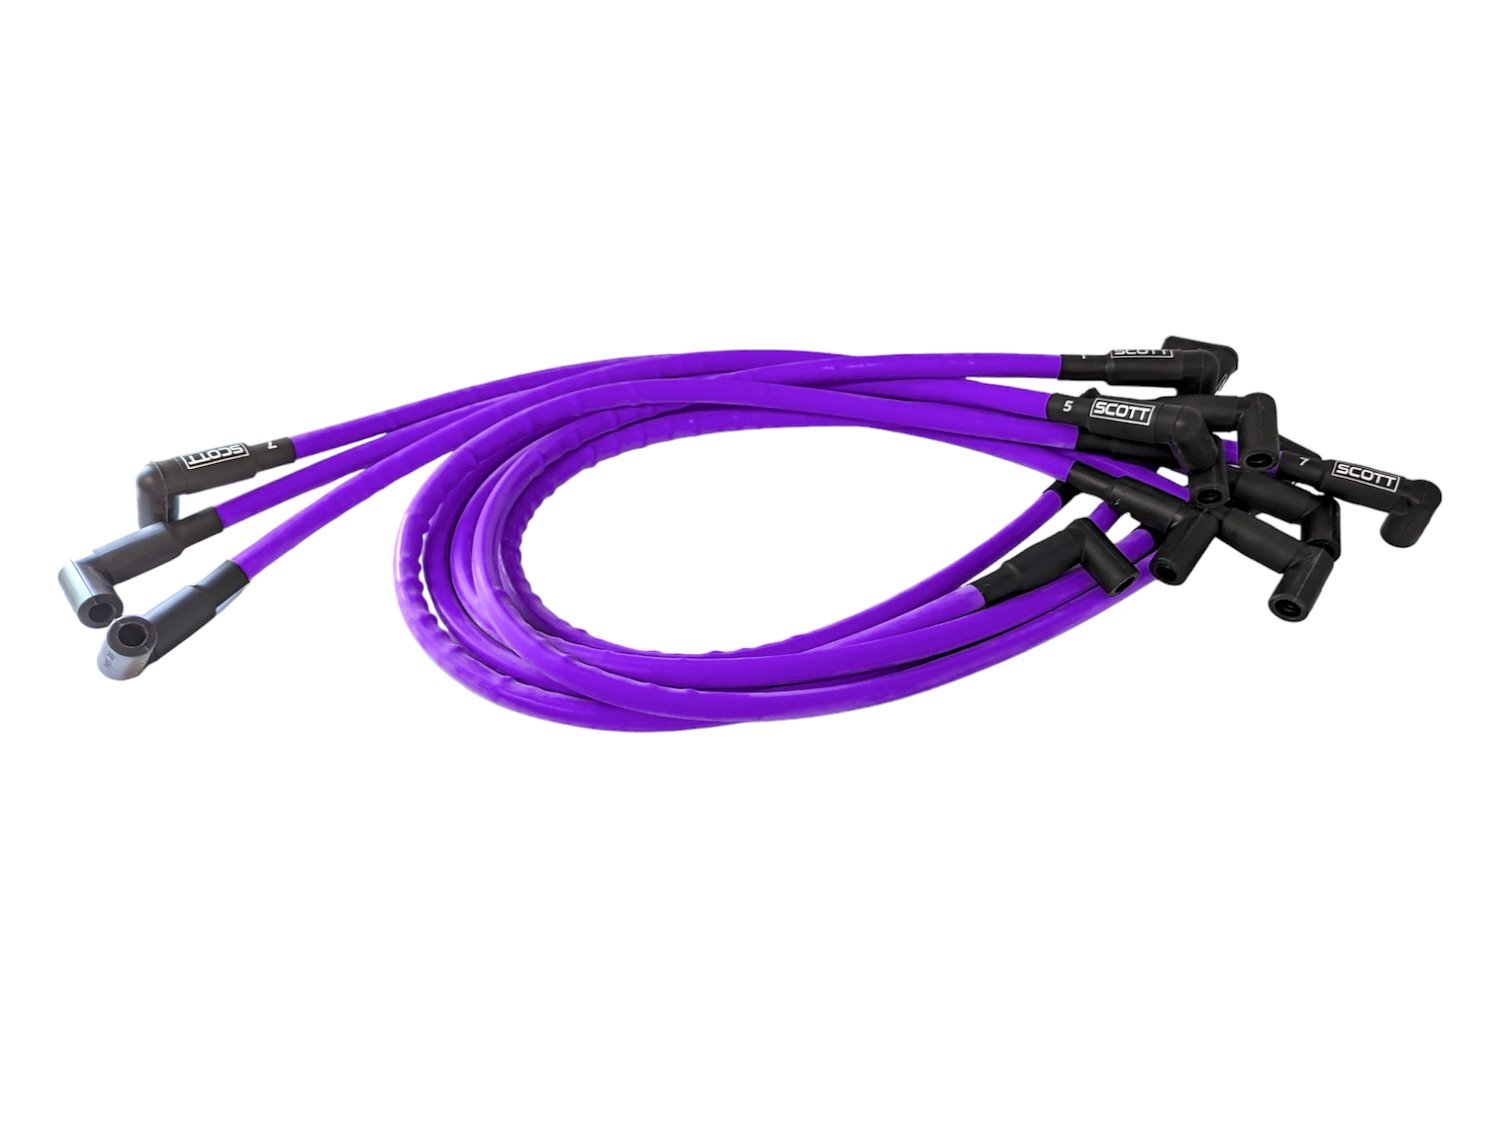 SPW-CH-430-6 High-Performance Silicone-Sleeved Spark Plug Wire Set for Big Block Ford, Under Header [Purple]